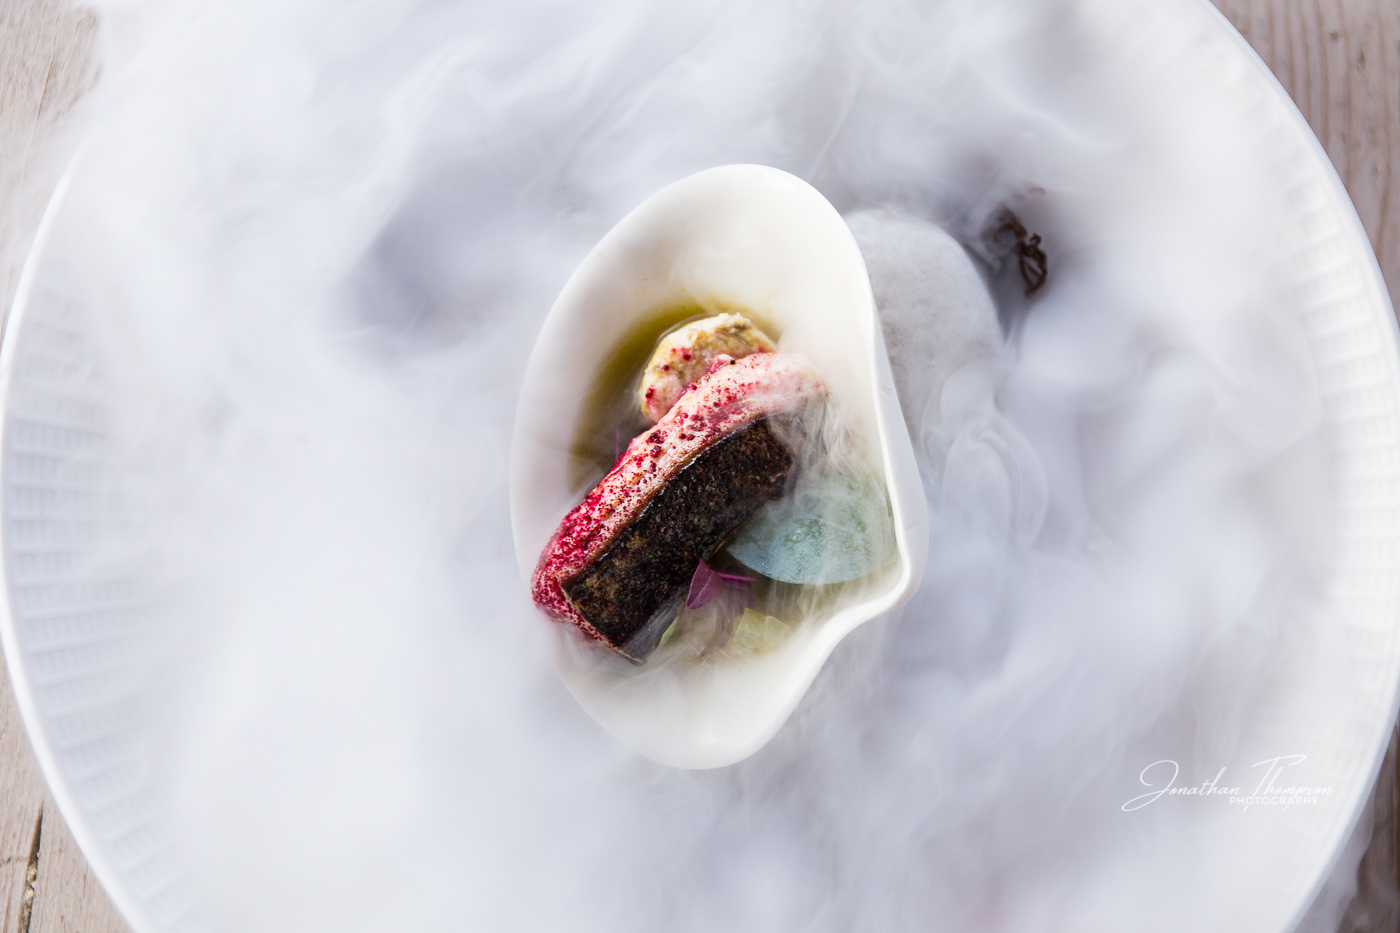 Top down view of a piece of cooked monk fish in a white bowl which the smoke from dry ice surrounding it. Chester Zoo